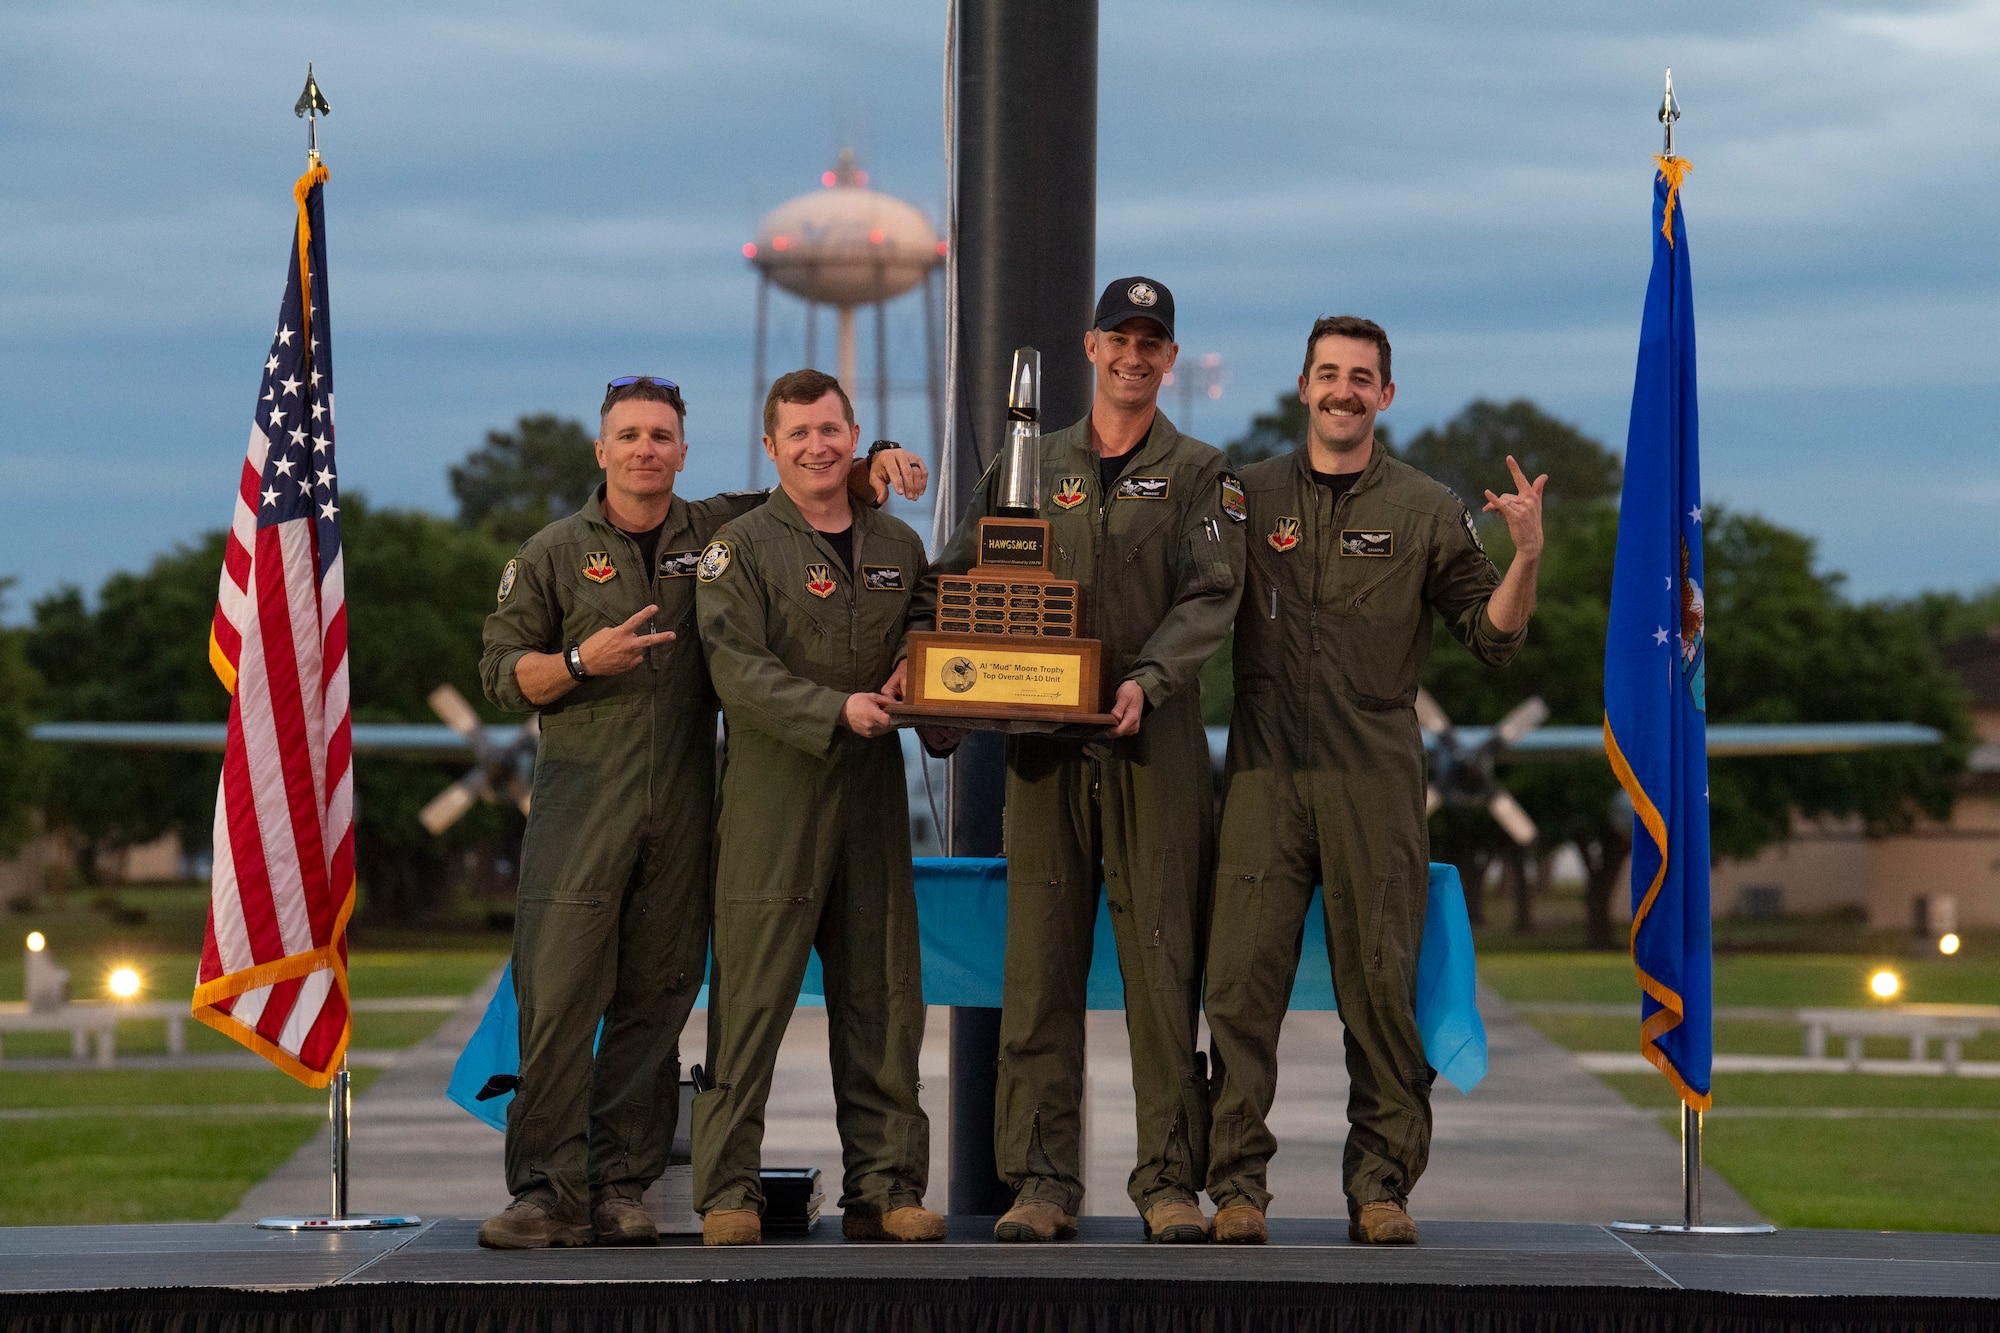 A photo of four Airmen posing, holding a trophy.